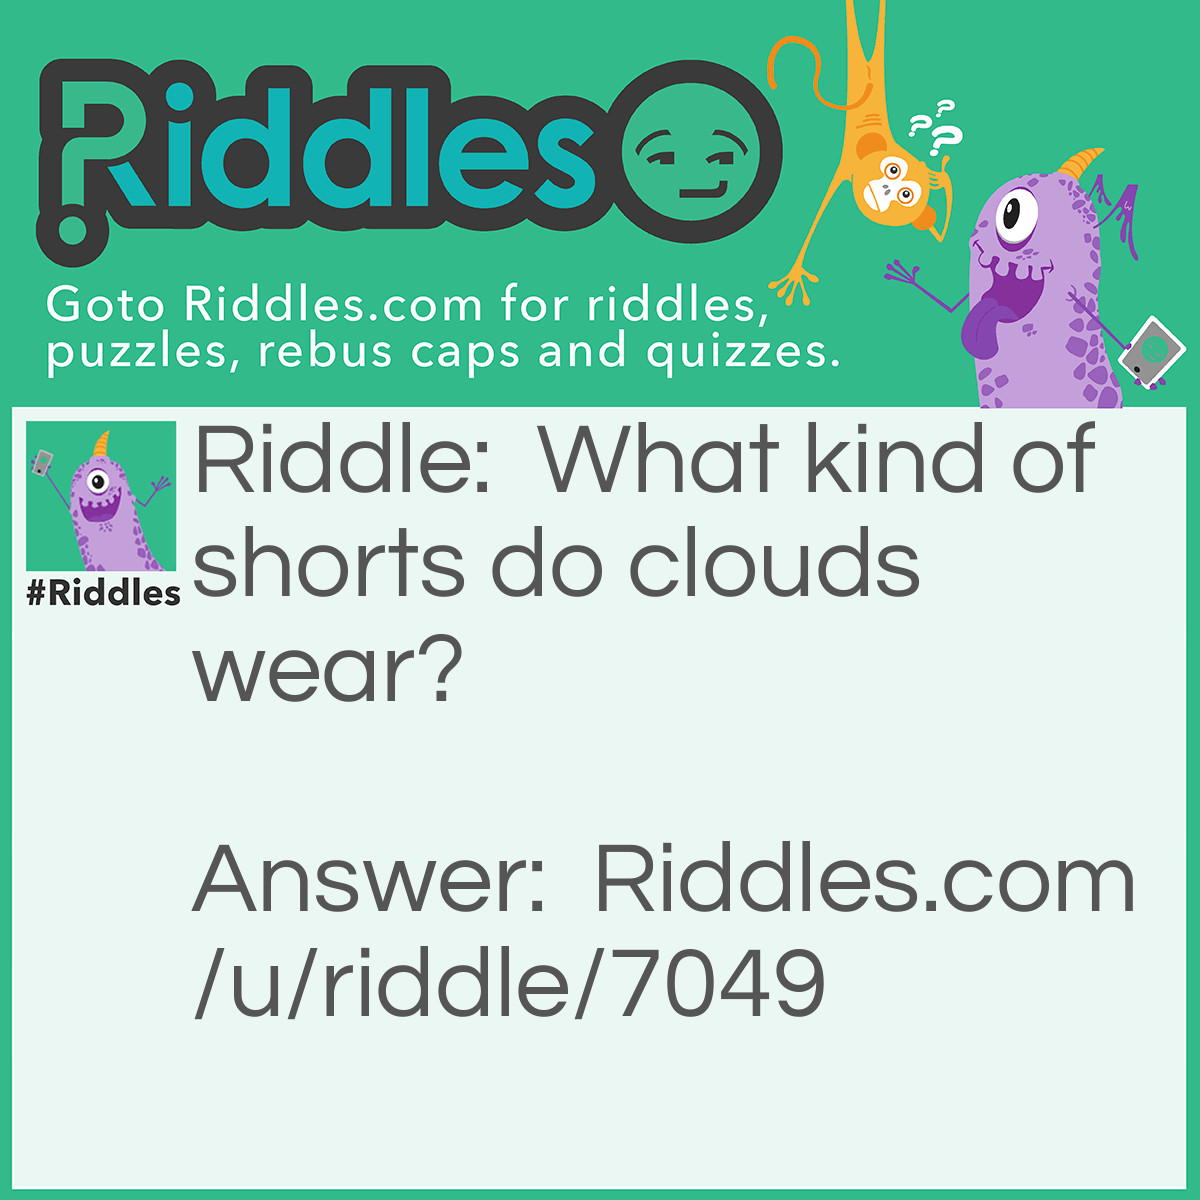 Riddle: What kind of shorts do clouds wear? Answer: Thunderwear.